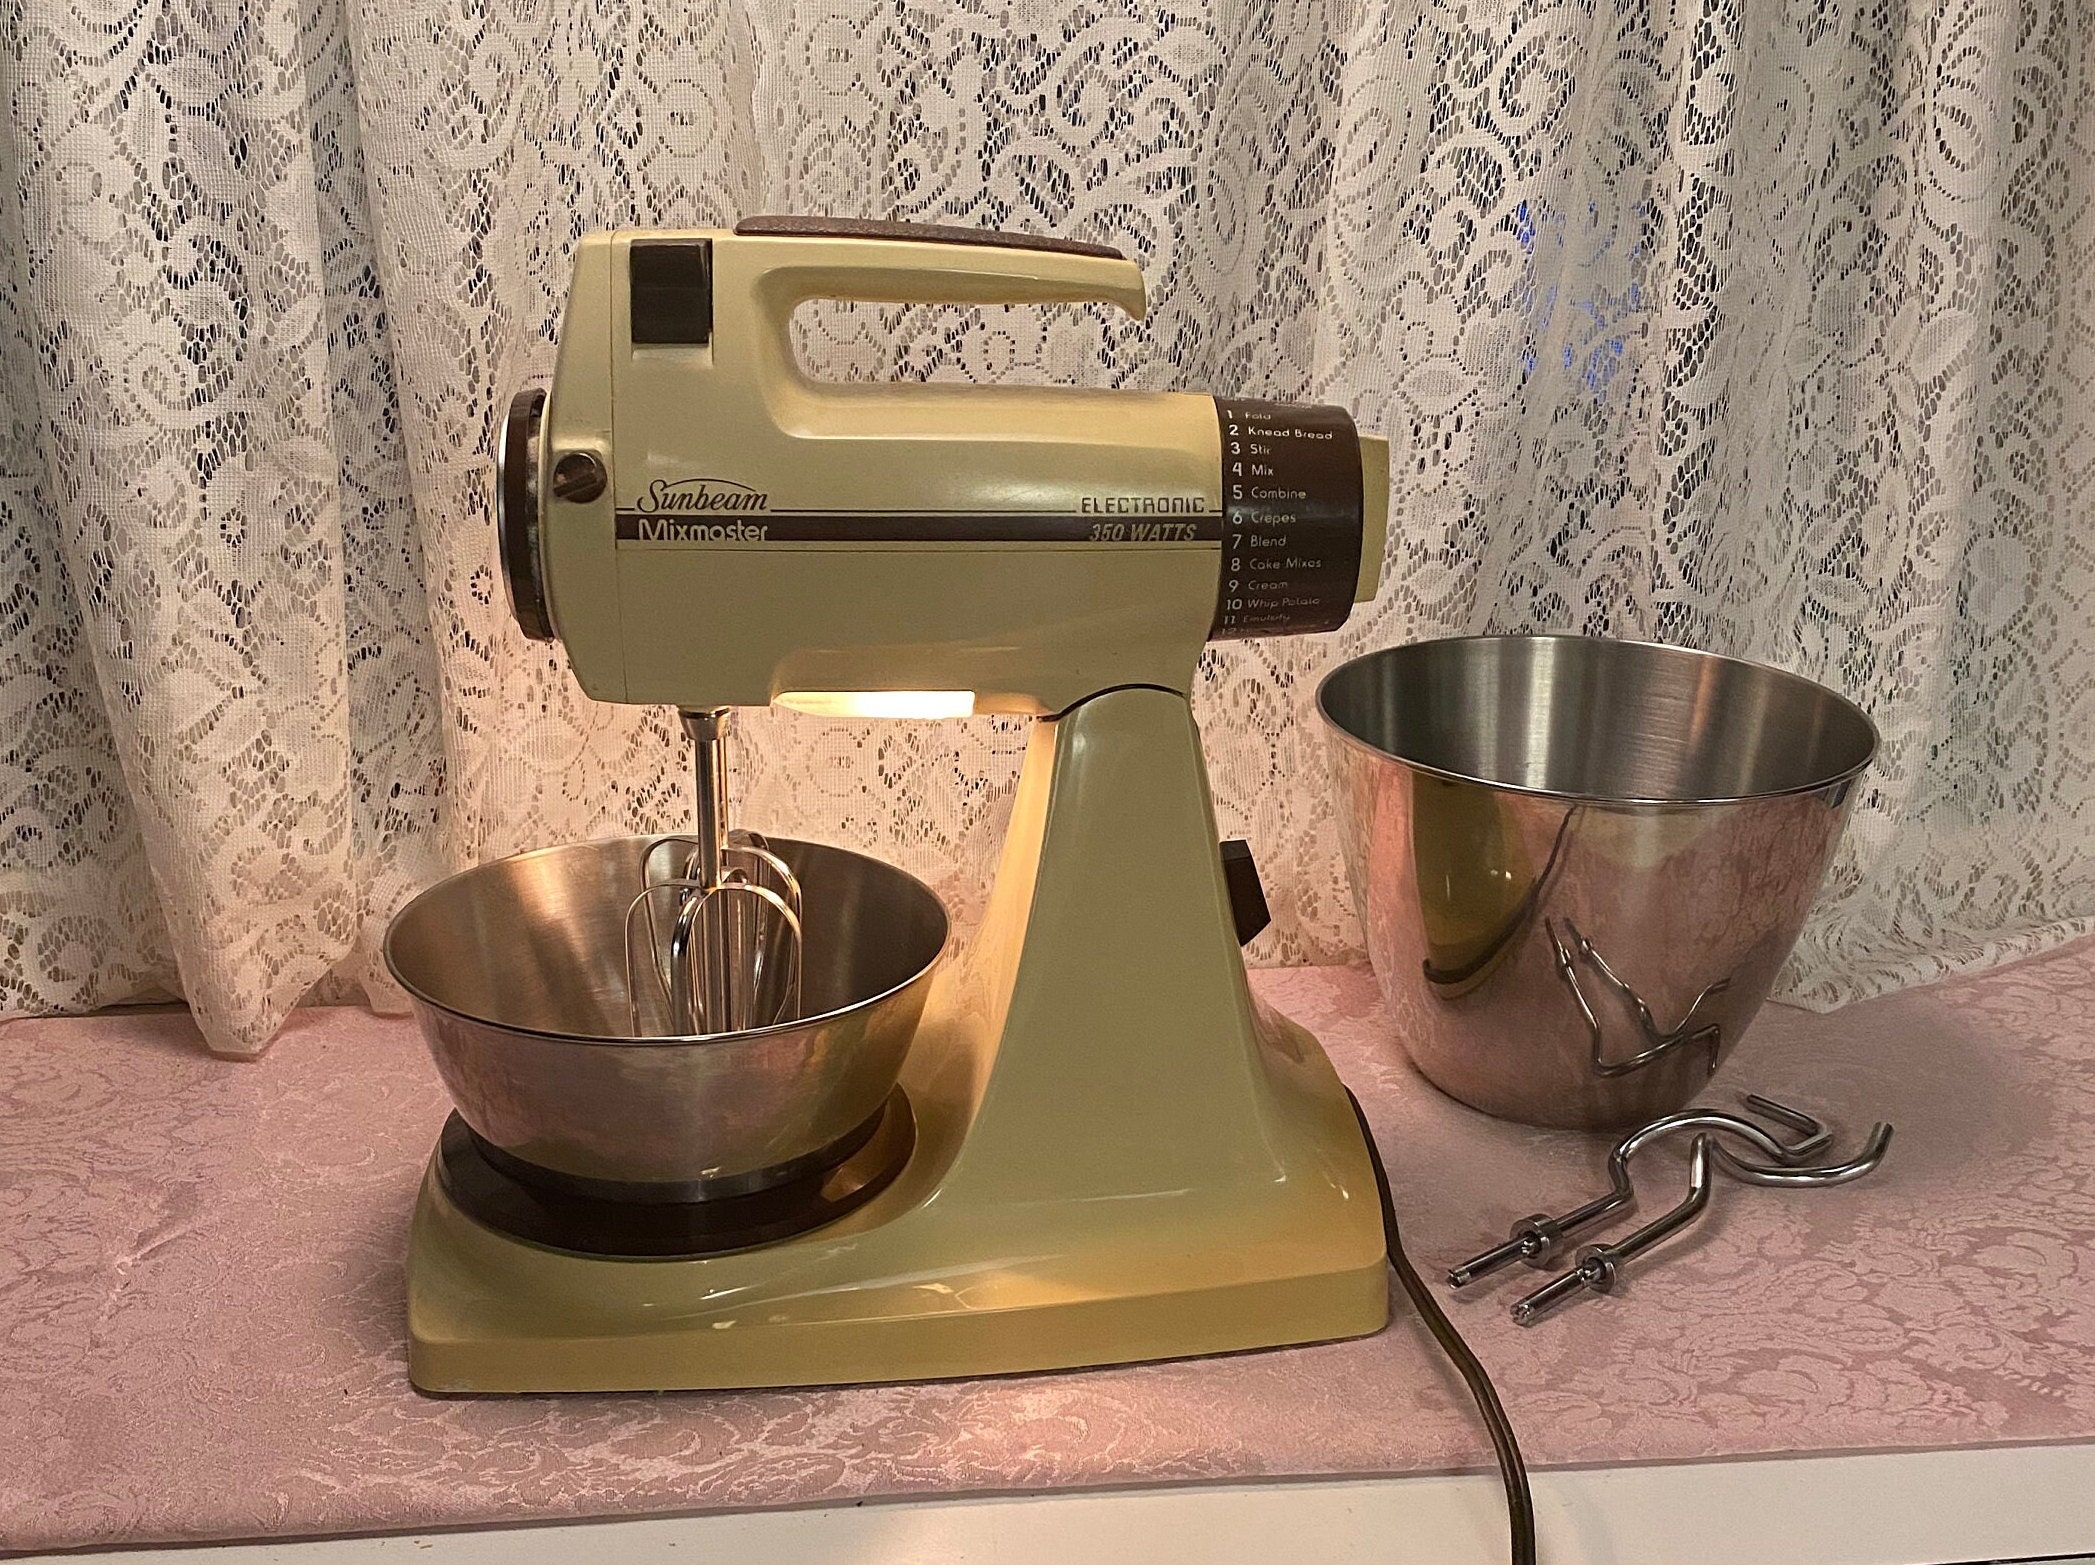 Sunbeam Mixmaster Replacement Beaters or Hooks Stand Mixer